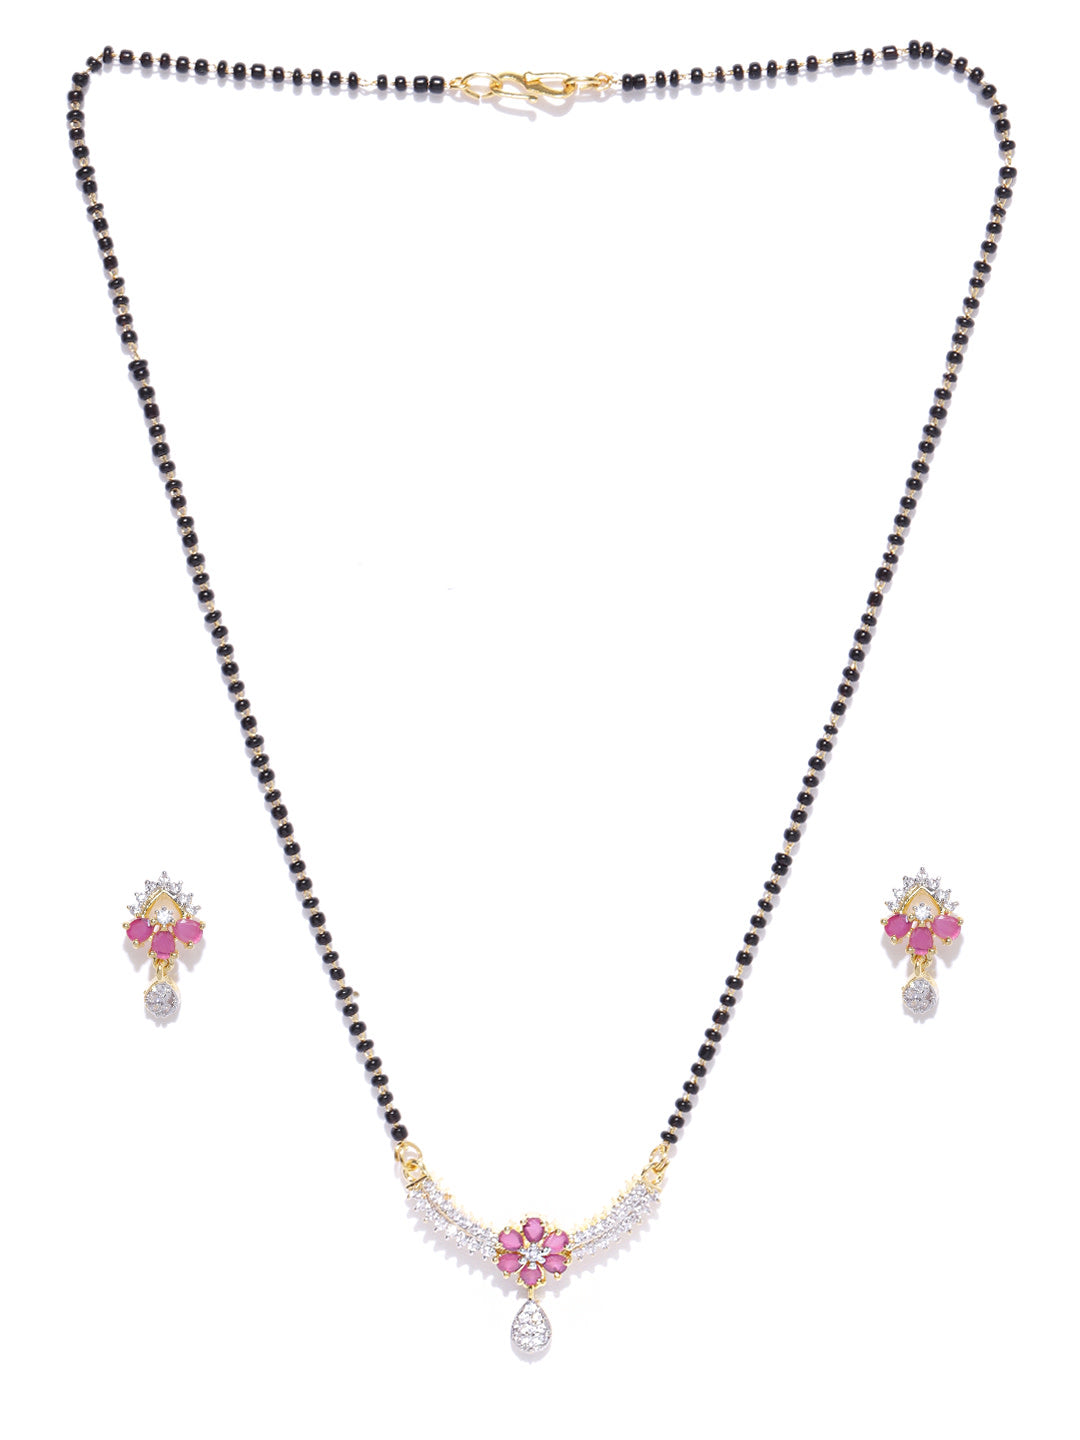 Gold-Plated American Diamond and Ruby Studded Floral Patterned Mangalsutra Set with Earrings